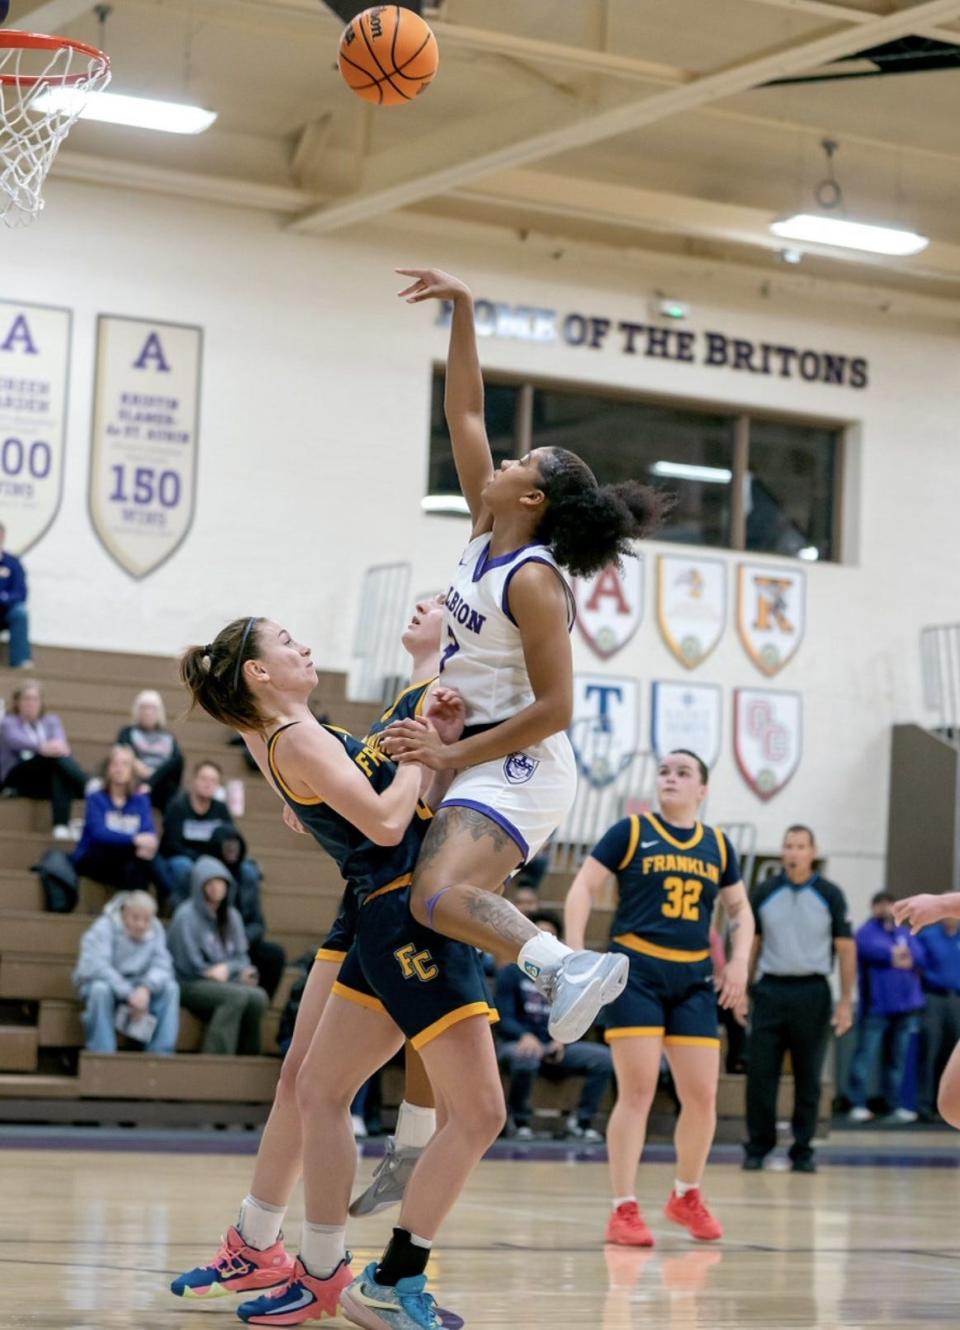 Former Lakeview High standout Brazyll Watkins, right, is currently the leading scorer for the Albion College women's basketball team. Albion College will begin MIAA tourney play on Wednesday.